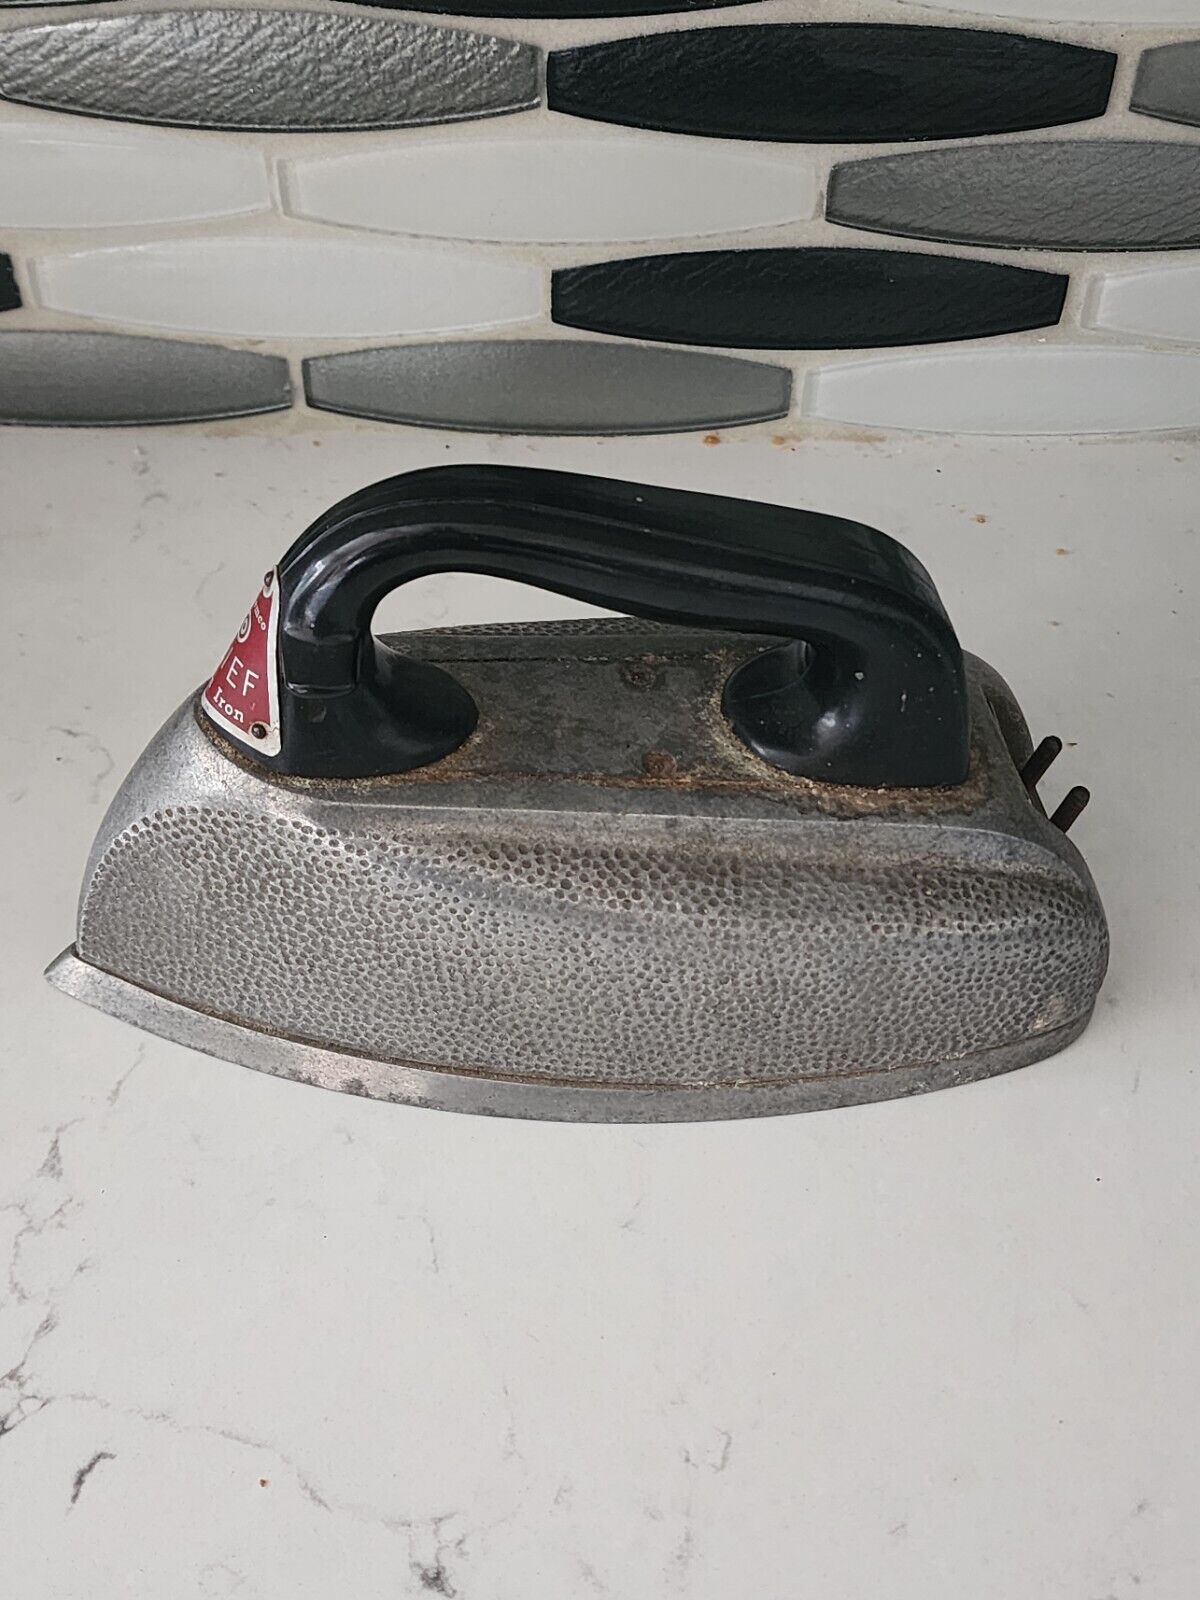 STEEMCO CHIEF STEAM IRON-Model 500-RARE-NO CORD-NOT TESTED-Vintage